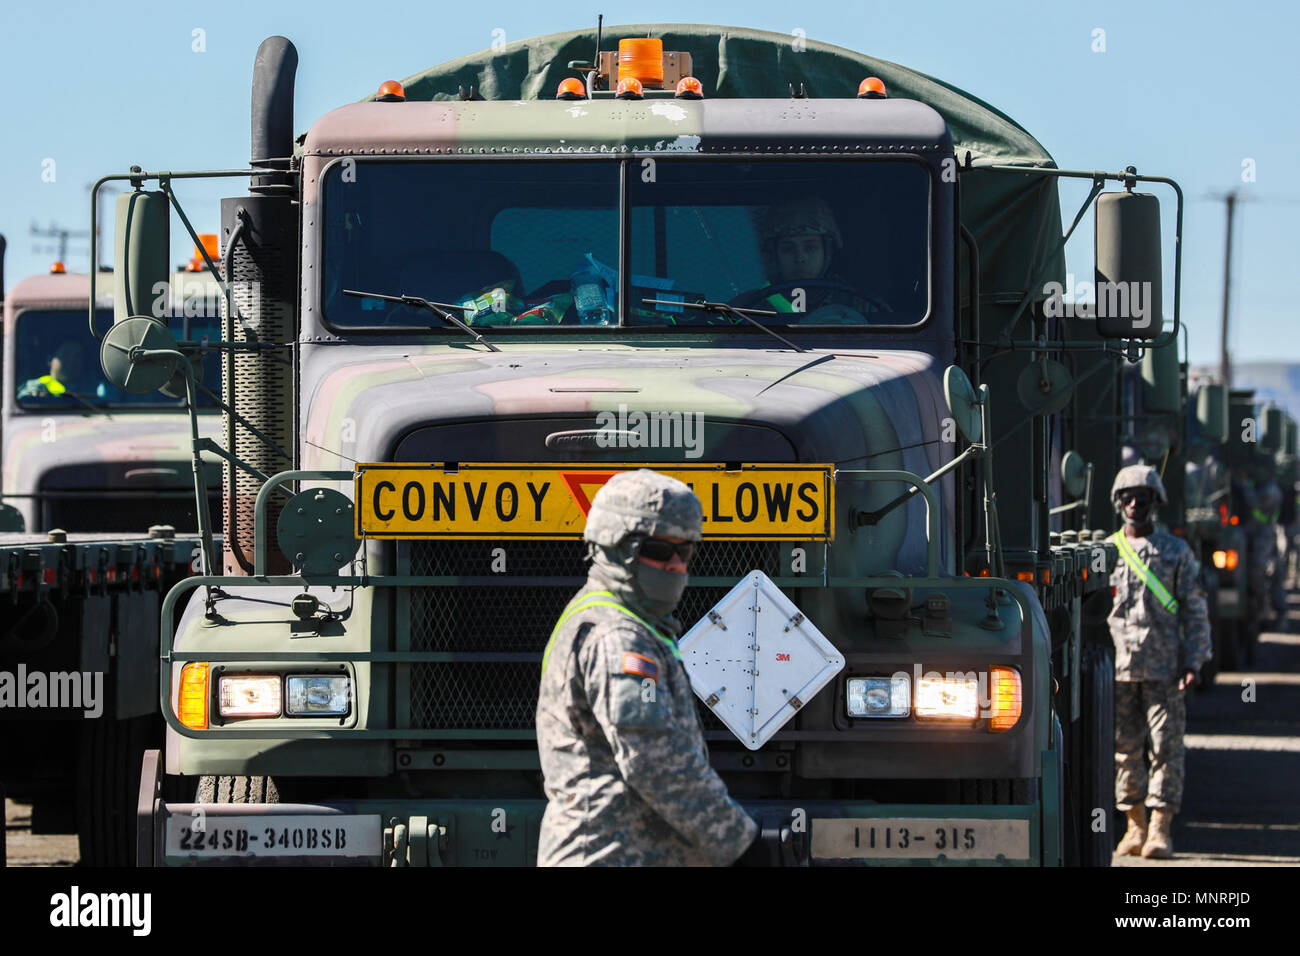 U.S. Army Reserve Soldiers prepare for convoy operations during Operation Patriot Bandolier at Military Ocean Terminal Concord, California, Mar. 4, 2018. Operation Patriot Bandolier is a real-world strategic mission utilizing U.S. Army Reserve, National Guard and Active component Soldiers transport Army materiel and munitions containers across the U.S. Stock Photo